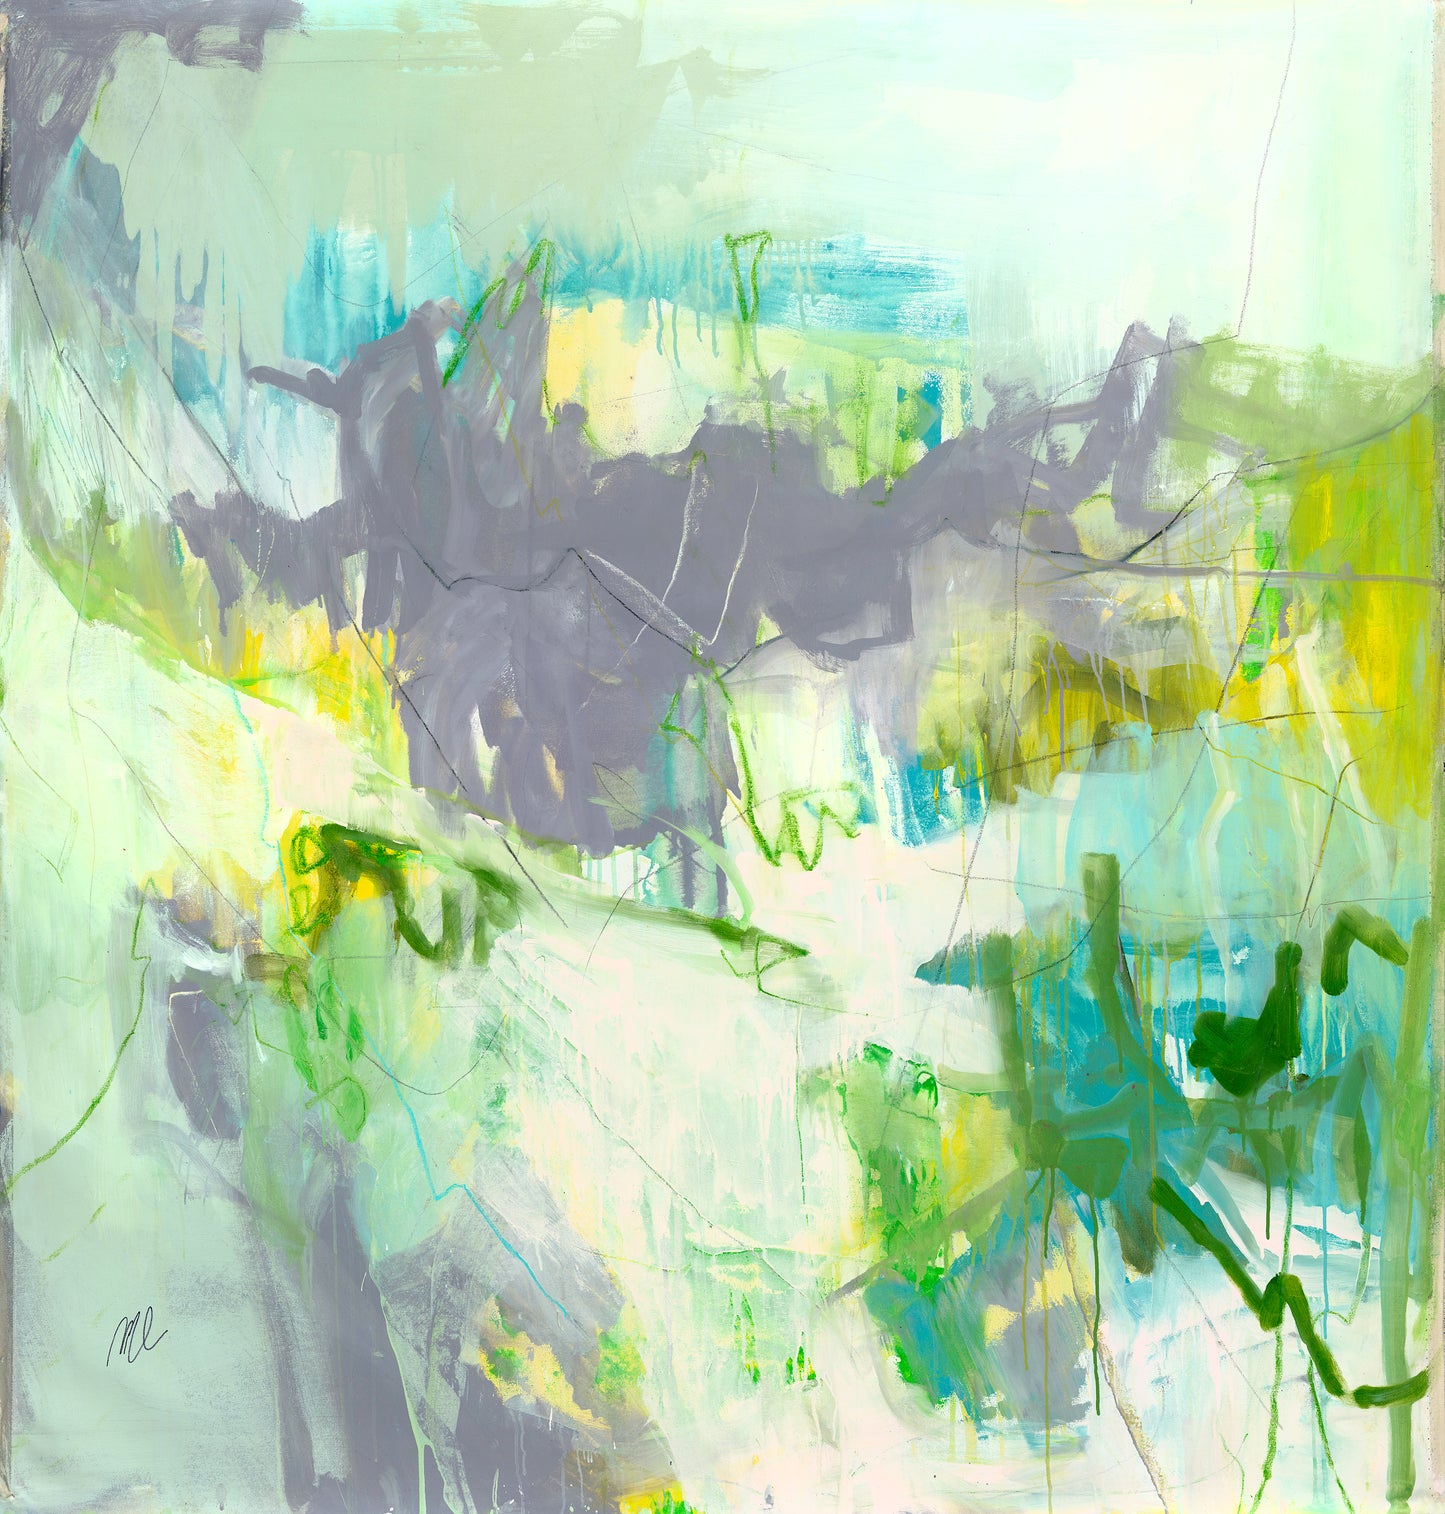 Lavender + Seagrass 3 | 60x60 (152x152 cm) | XL Abstract Painting on RC | by Mary Elizabeth | 2022 - Mary Elizabeth Meditative Abstract Art